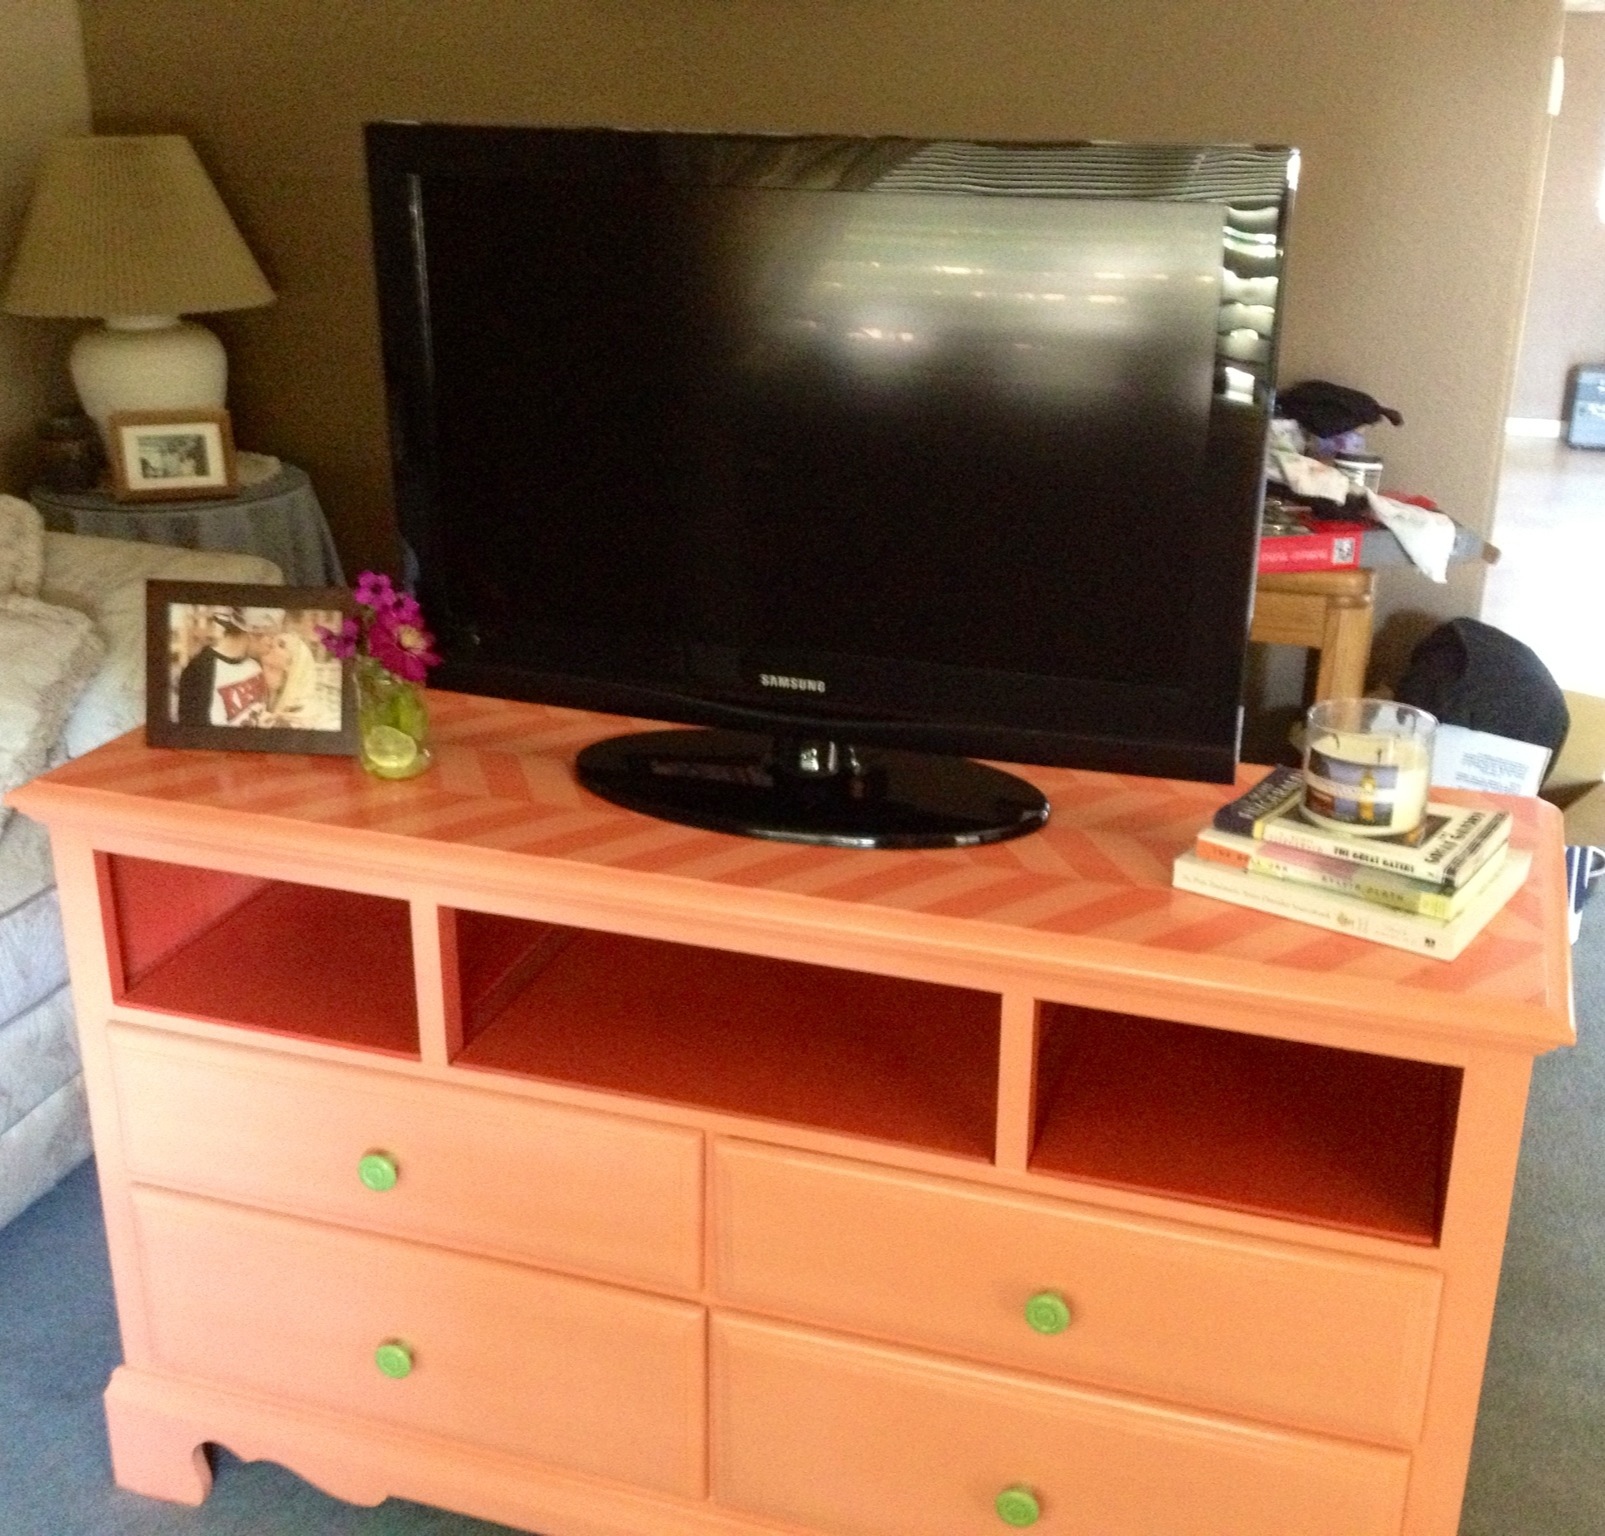 Before and After | Dresser turned Tv-stand | courtney's craftin&amp;cookin